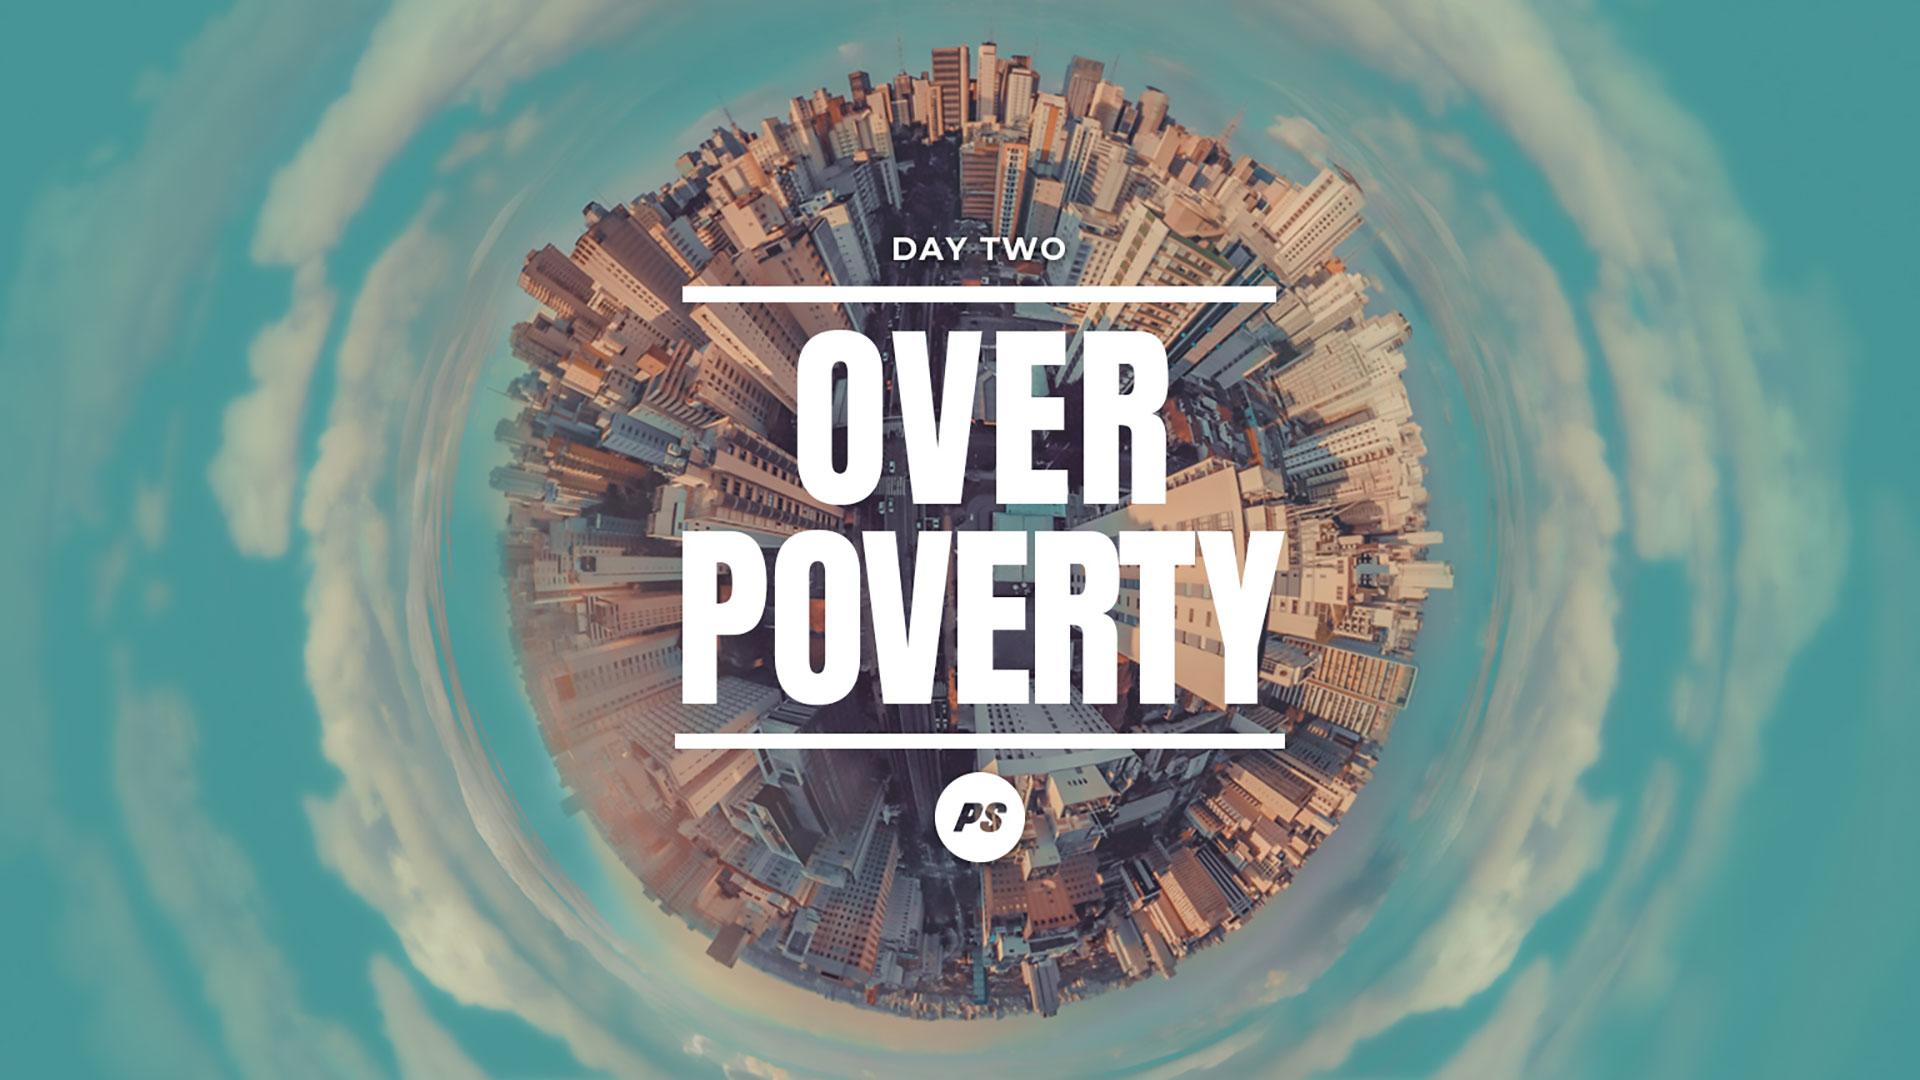 Featured Image for “DAY 2 – He is over poverty”